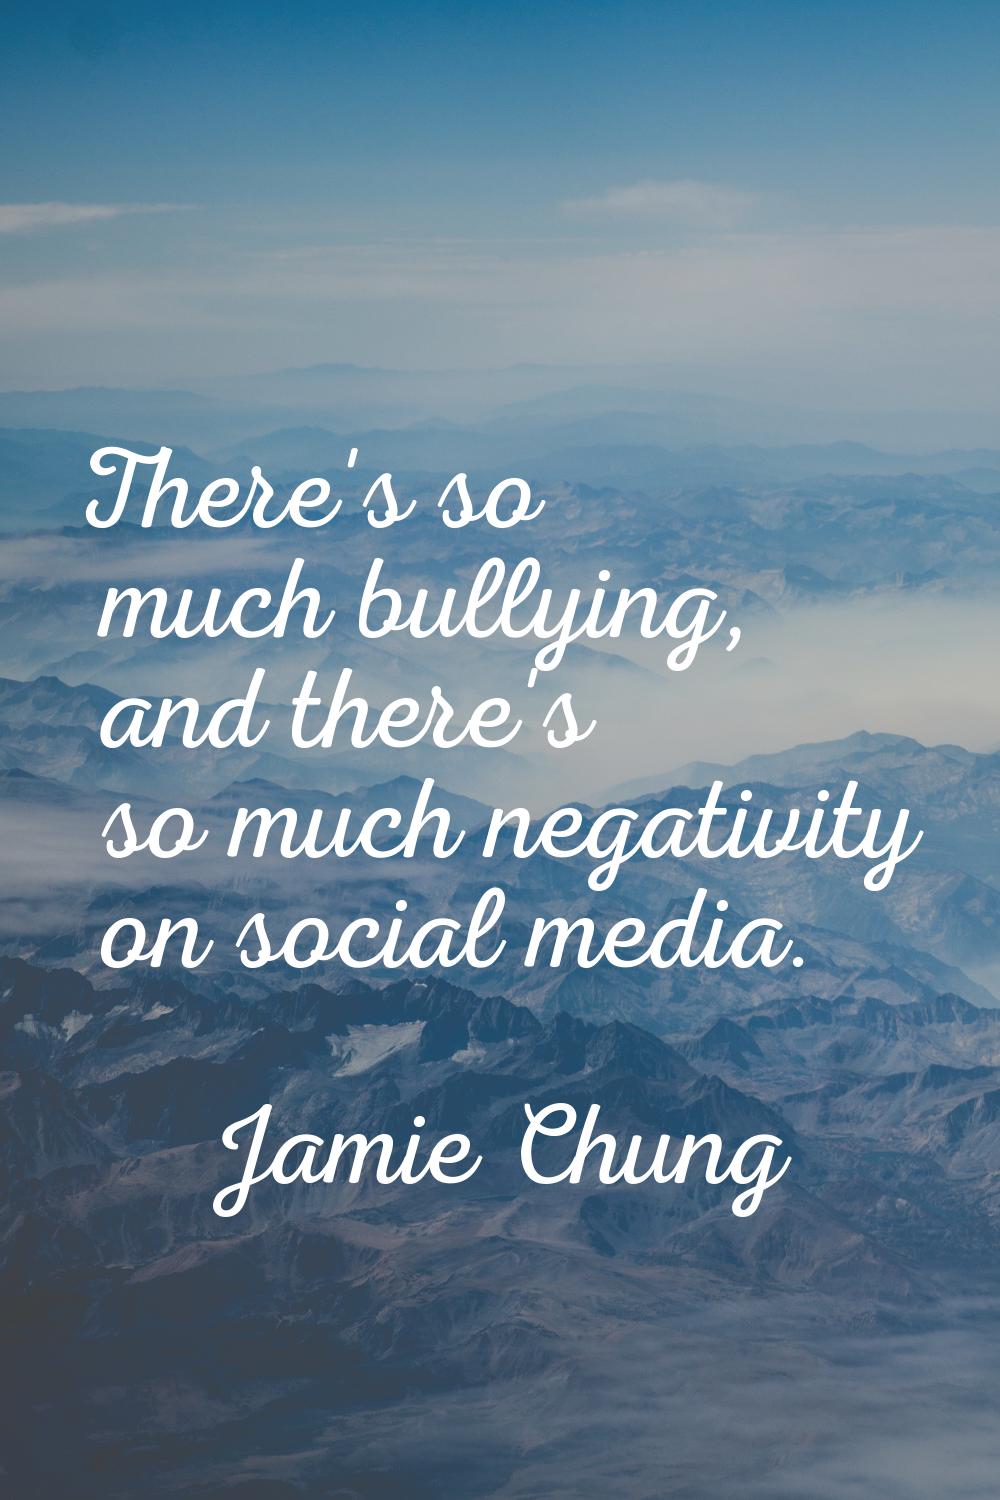 There's so much bullying, and there's so much negativity on social media.